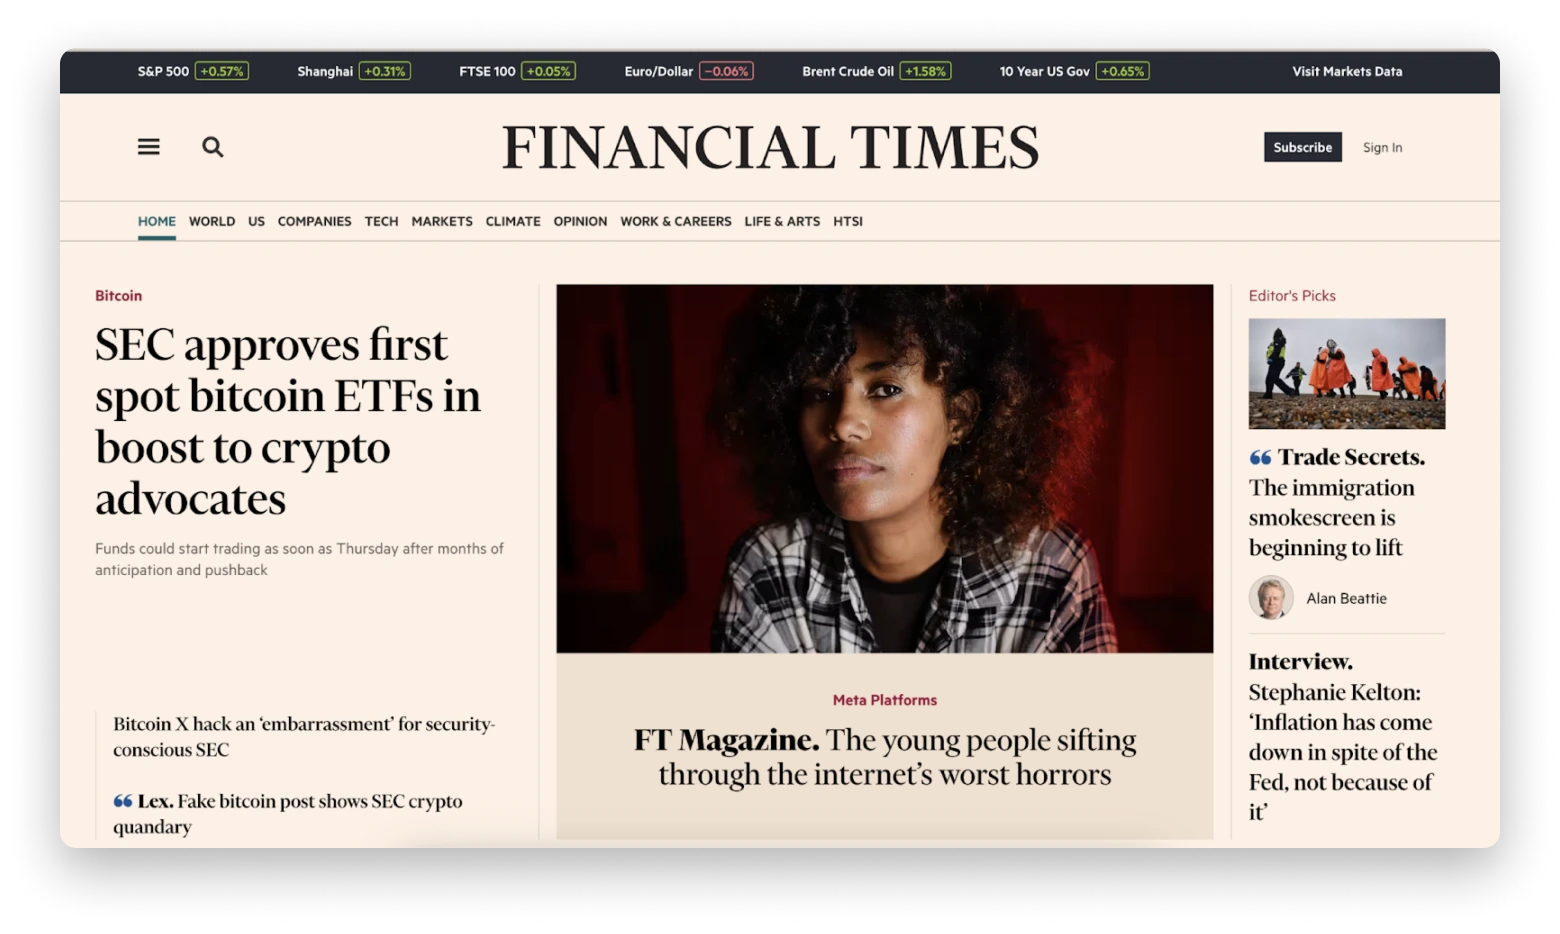 Financial Times home page